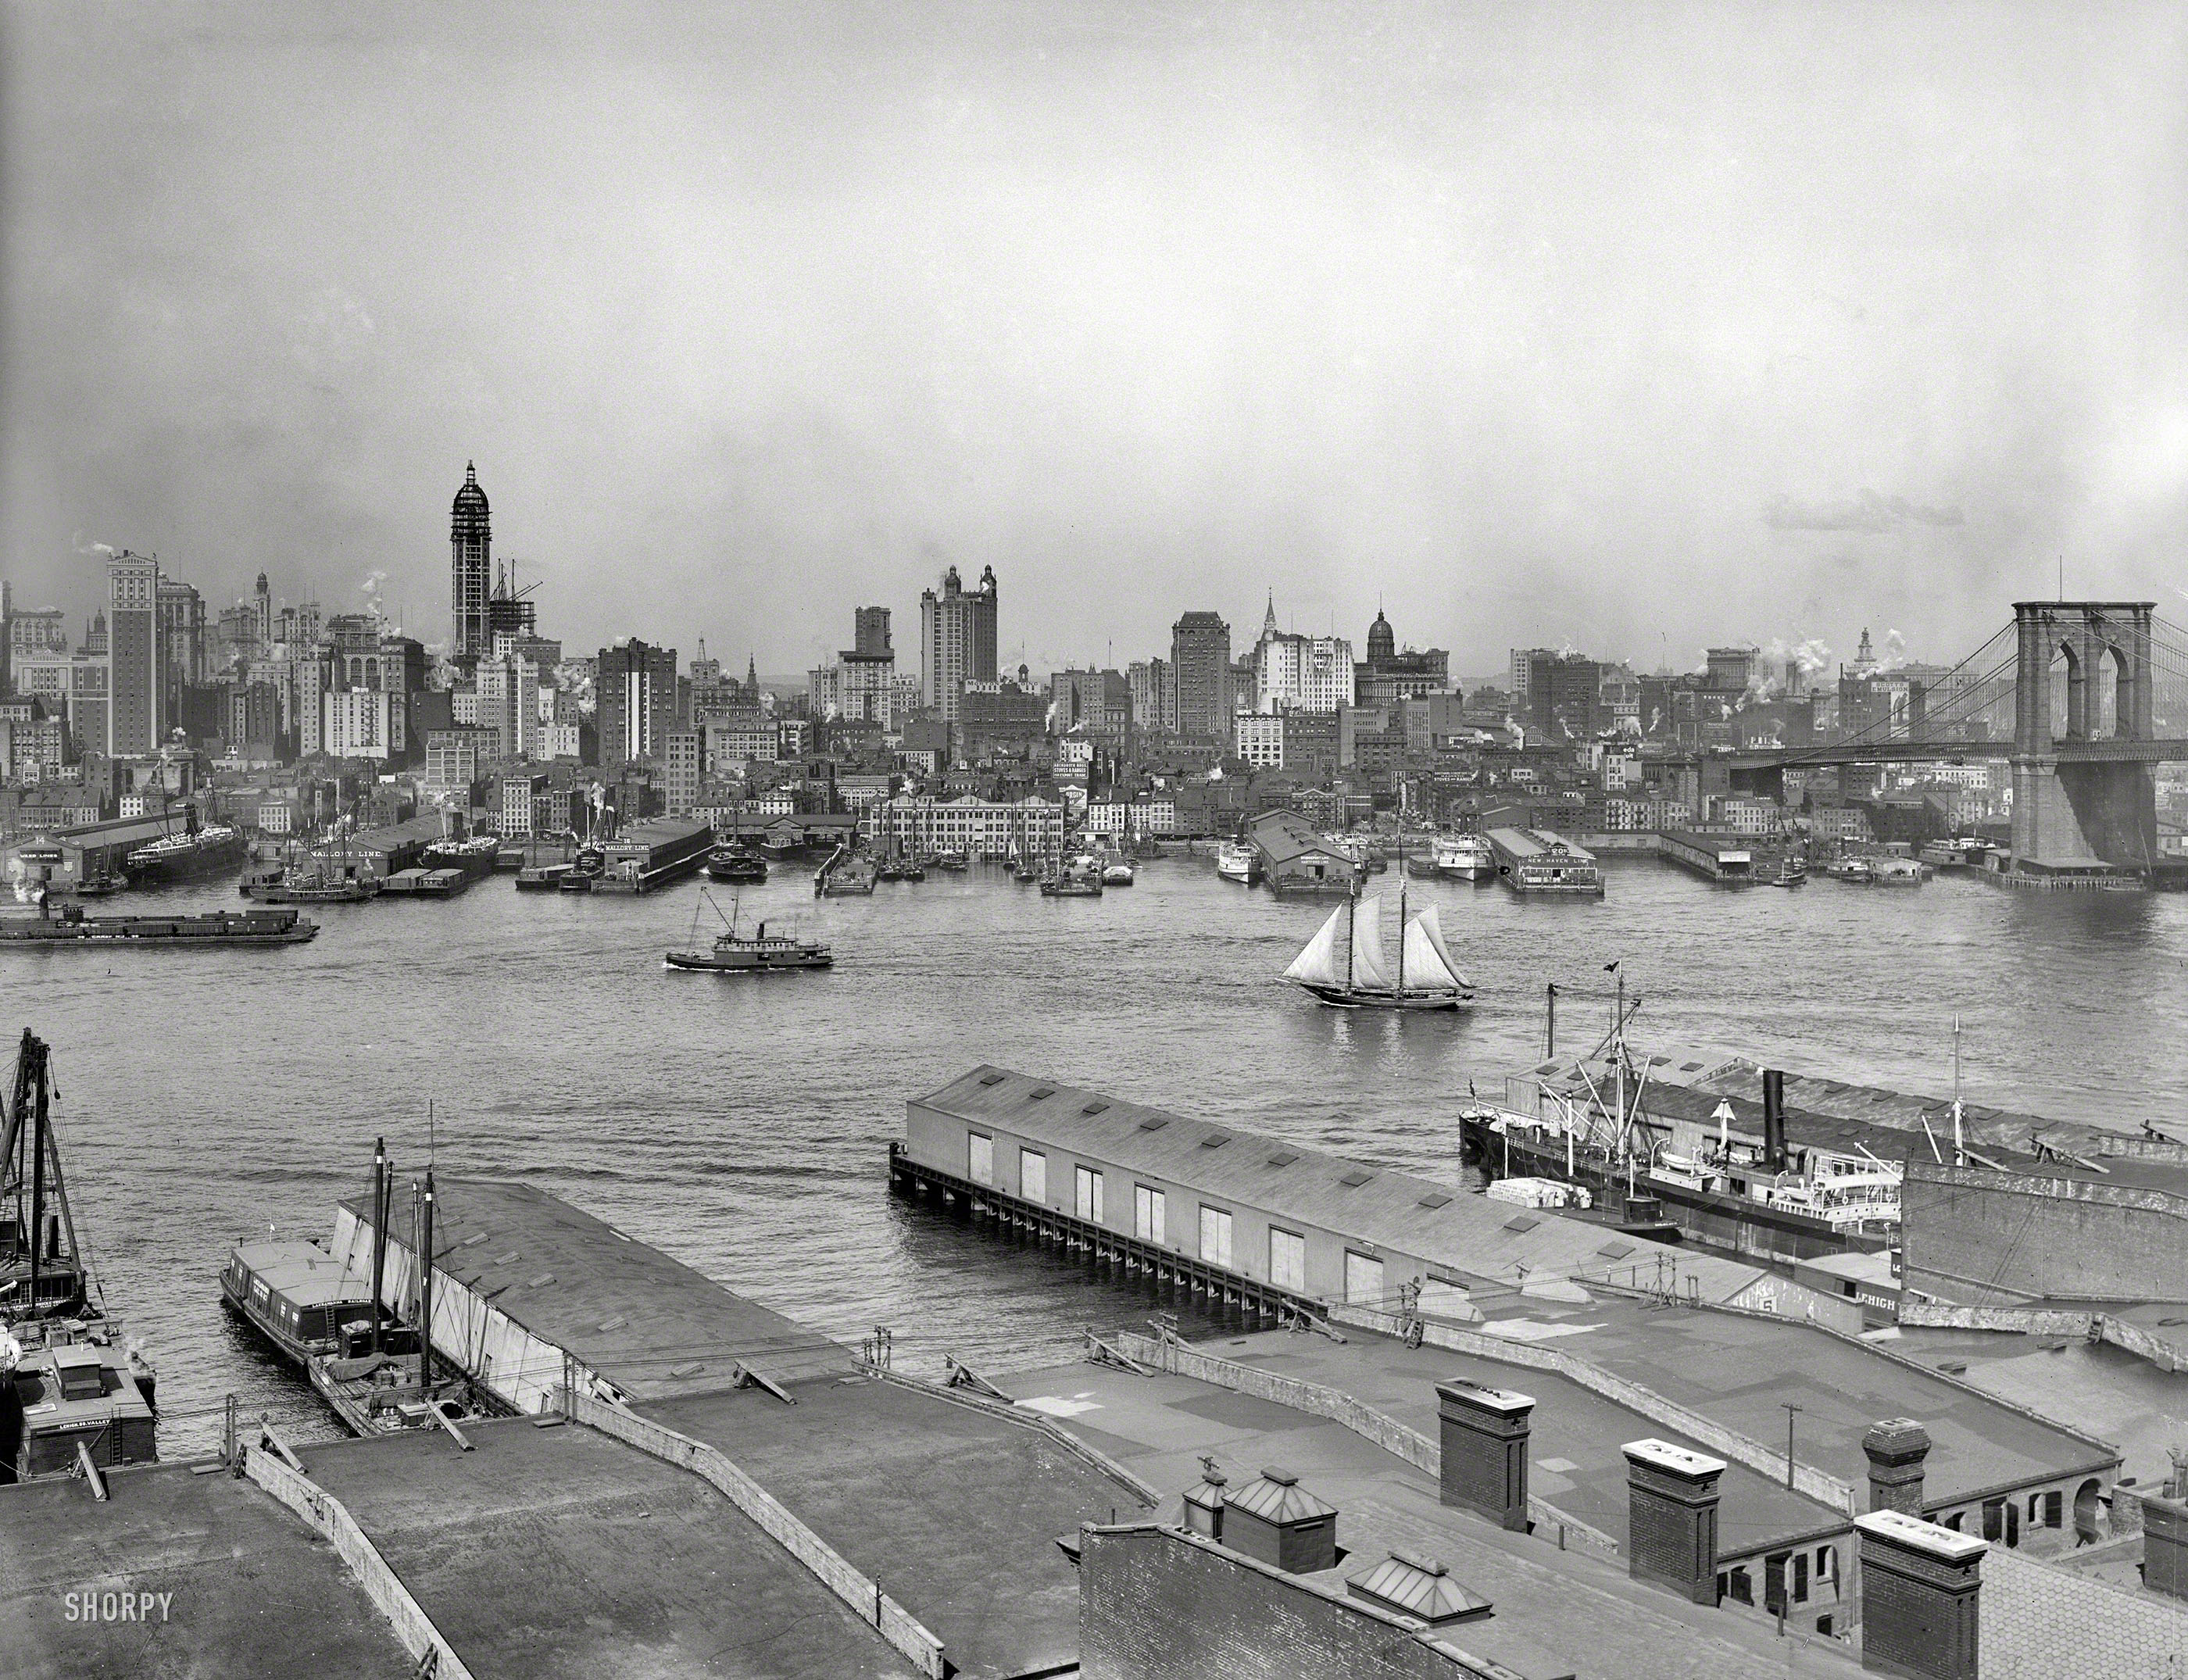 Manhattan circa 1907. "The heart of New York from Brooklyn." A continuation of this view across the East River. Landmarks include the Singer Building under construction, the Park Row building and Brooklyn Bridge. View full size.